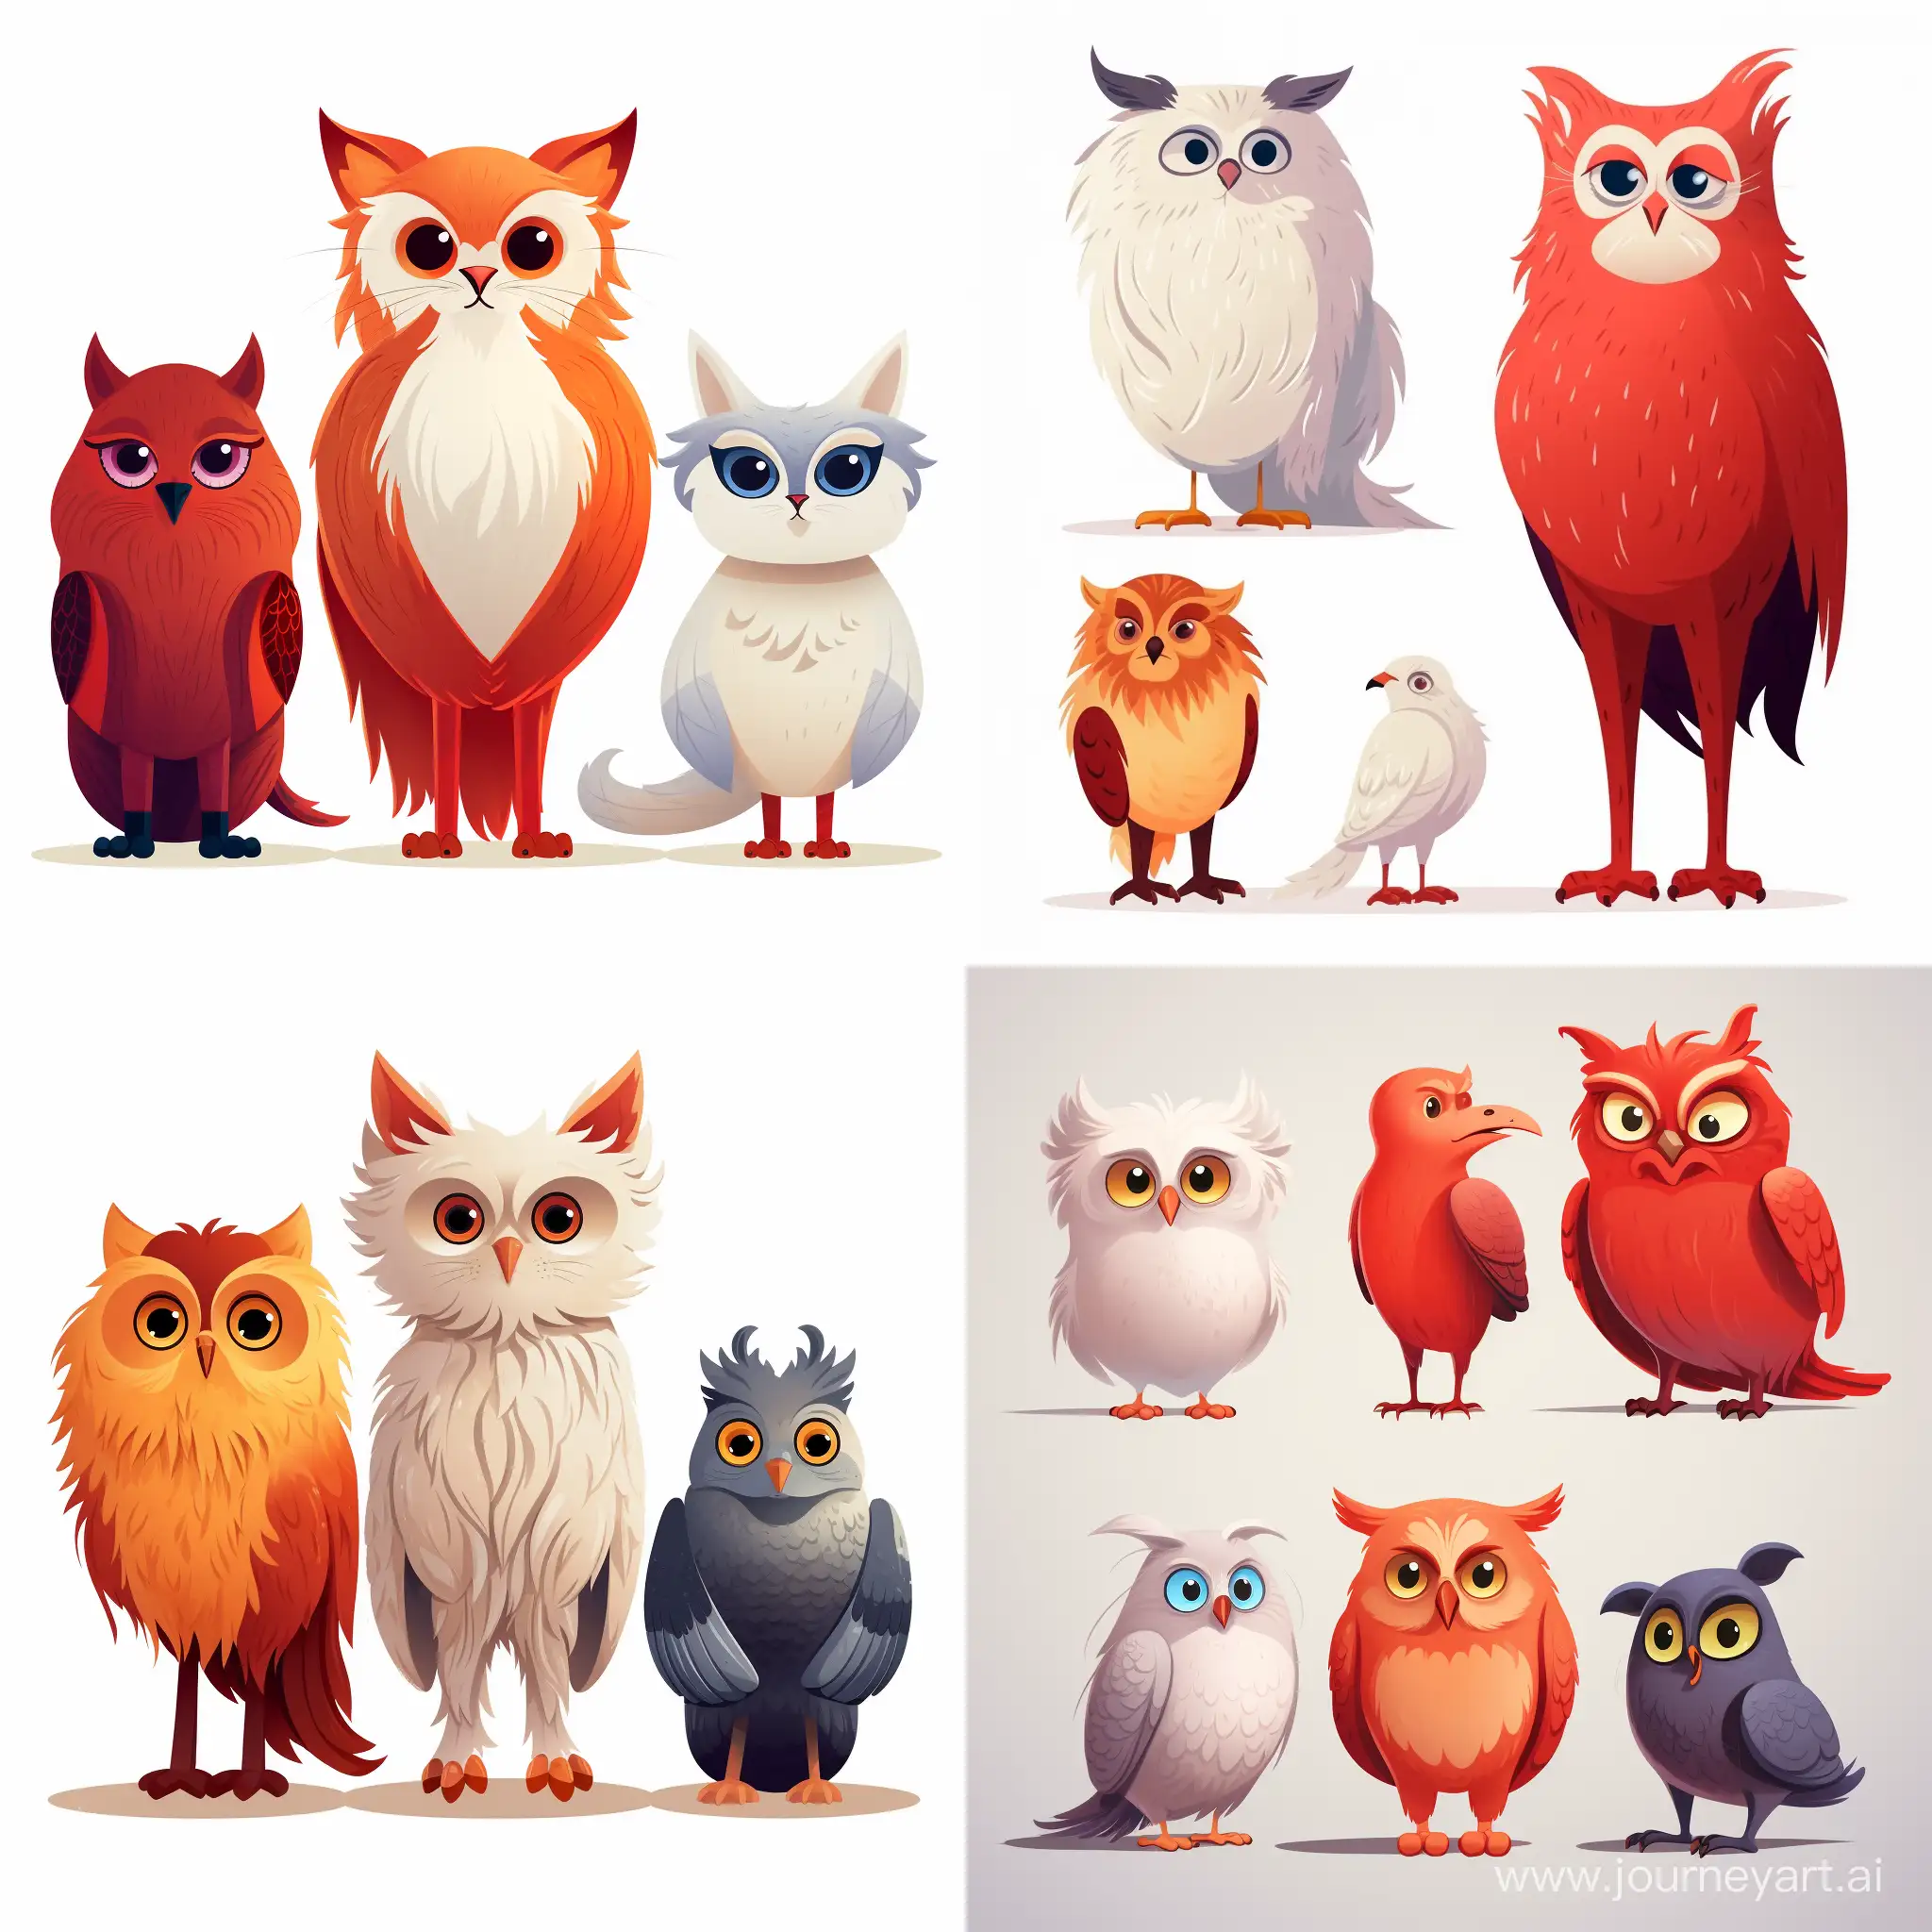 figures of animals standing apart: Hedwig (or Hedwig) snow-white owl 
Scabbers – a rat,
Crookshanks – a big red cat,
on a white background, bright colors, cartoon style, illustration